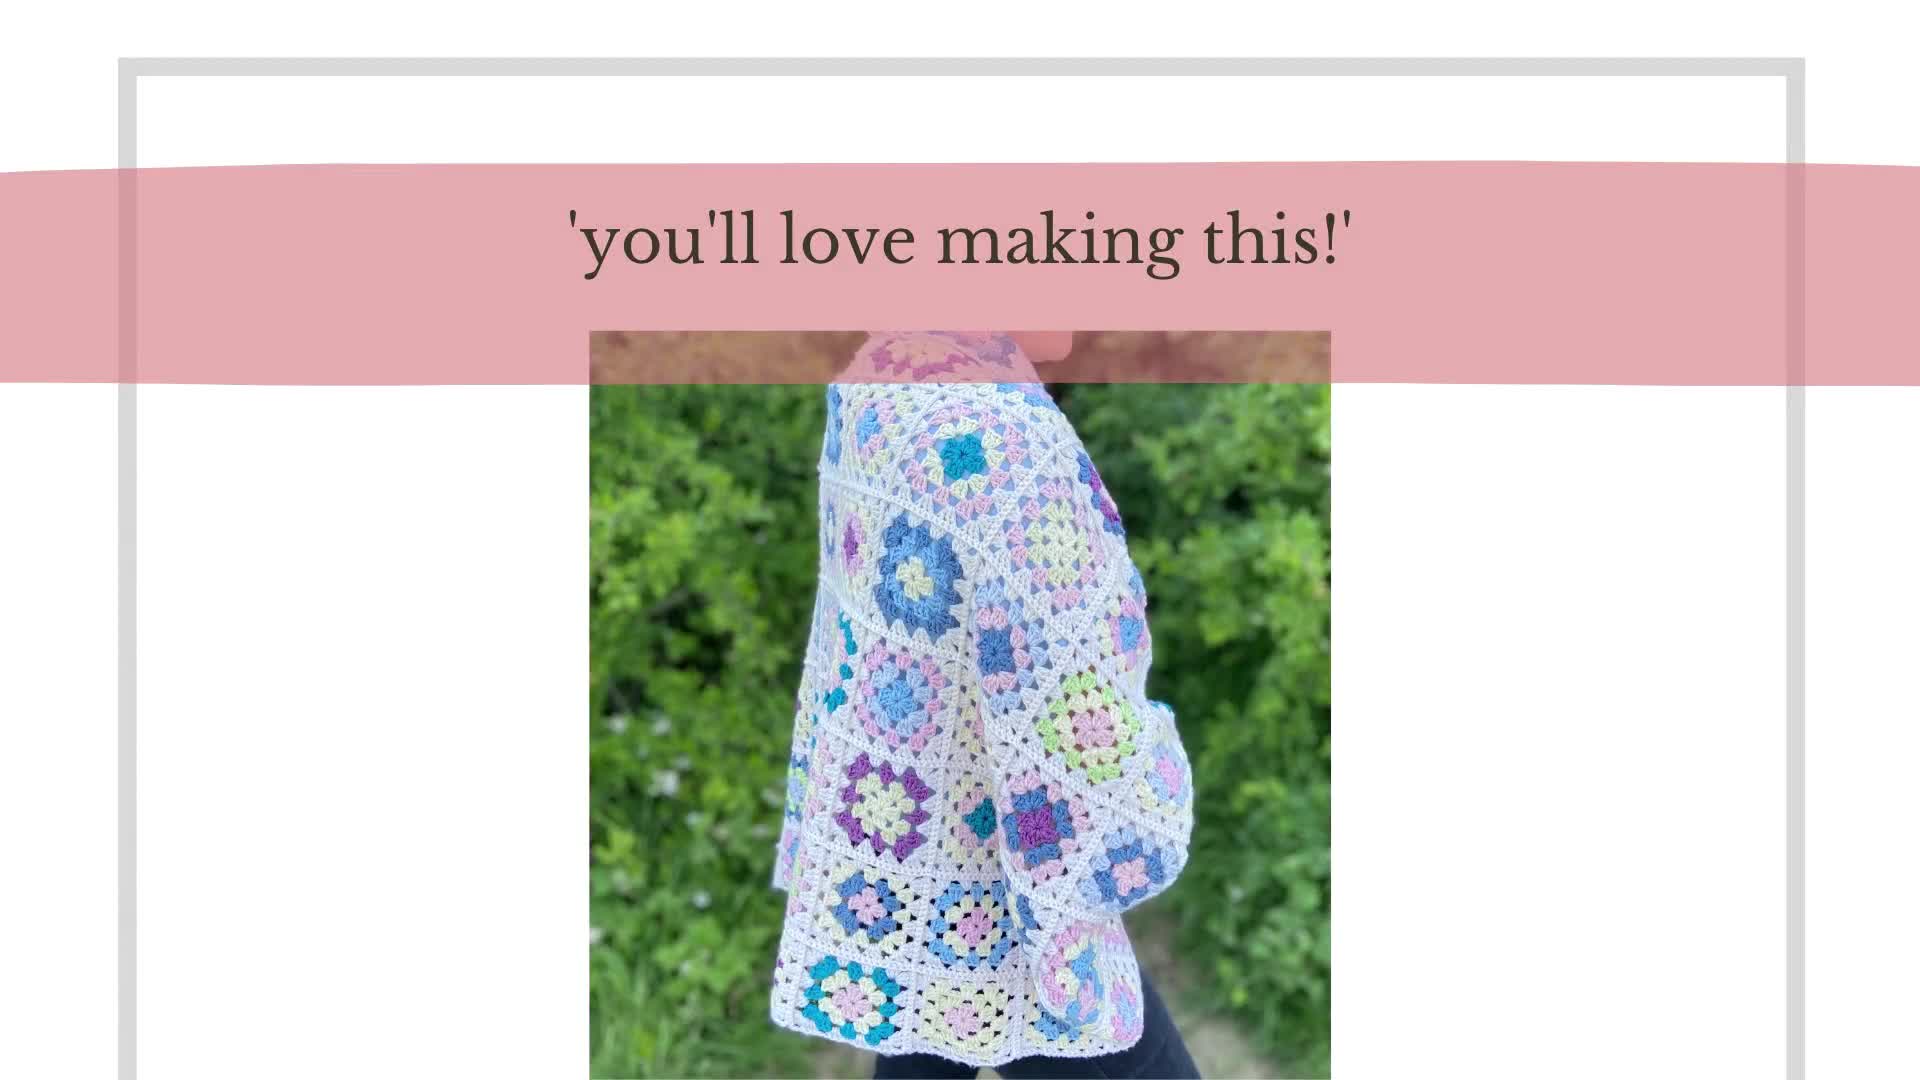 Learn to crochet a granny square blanket cardigan